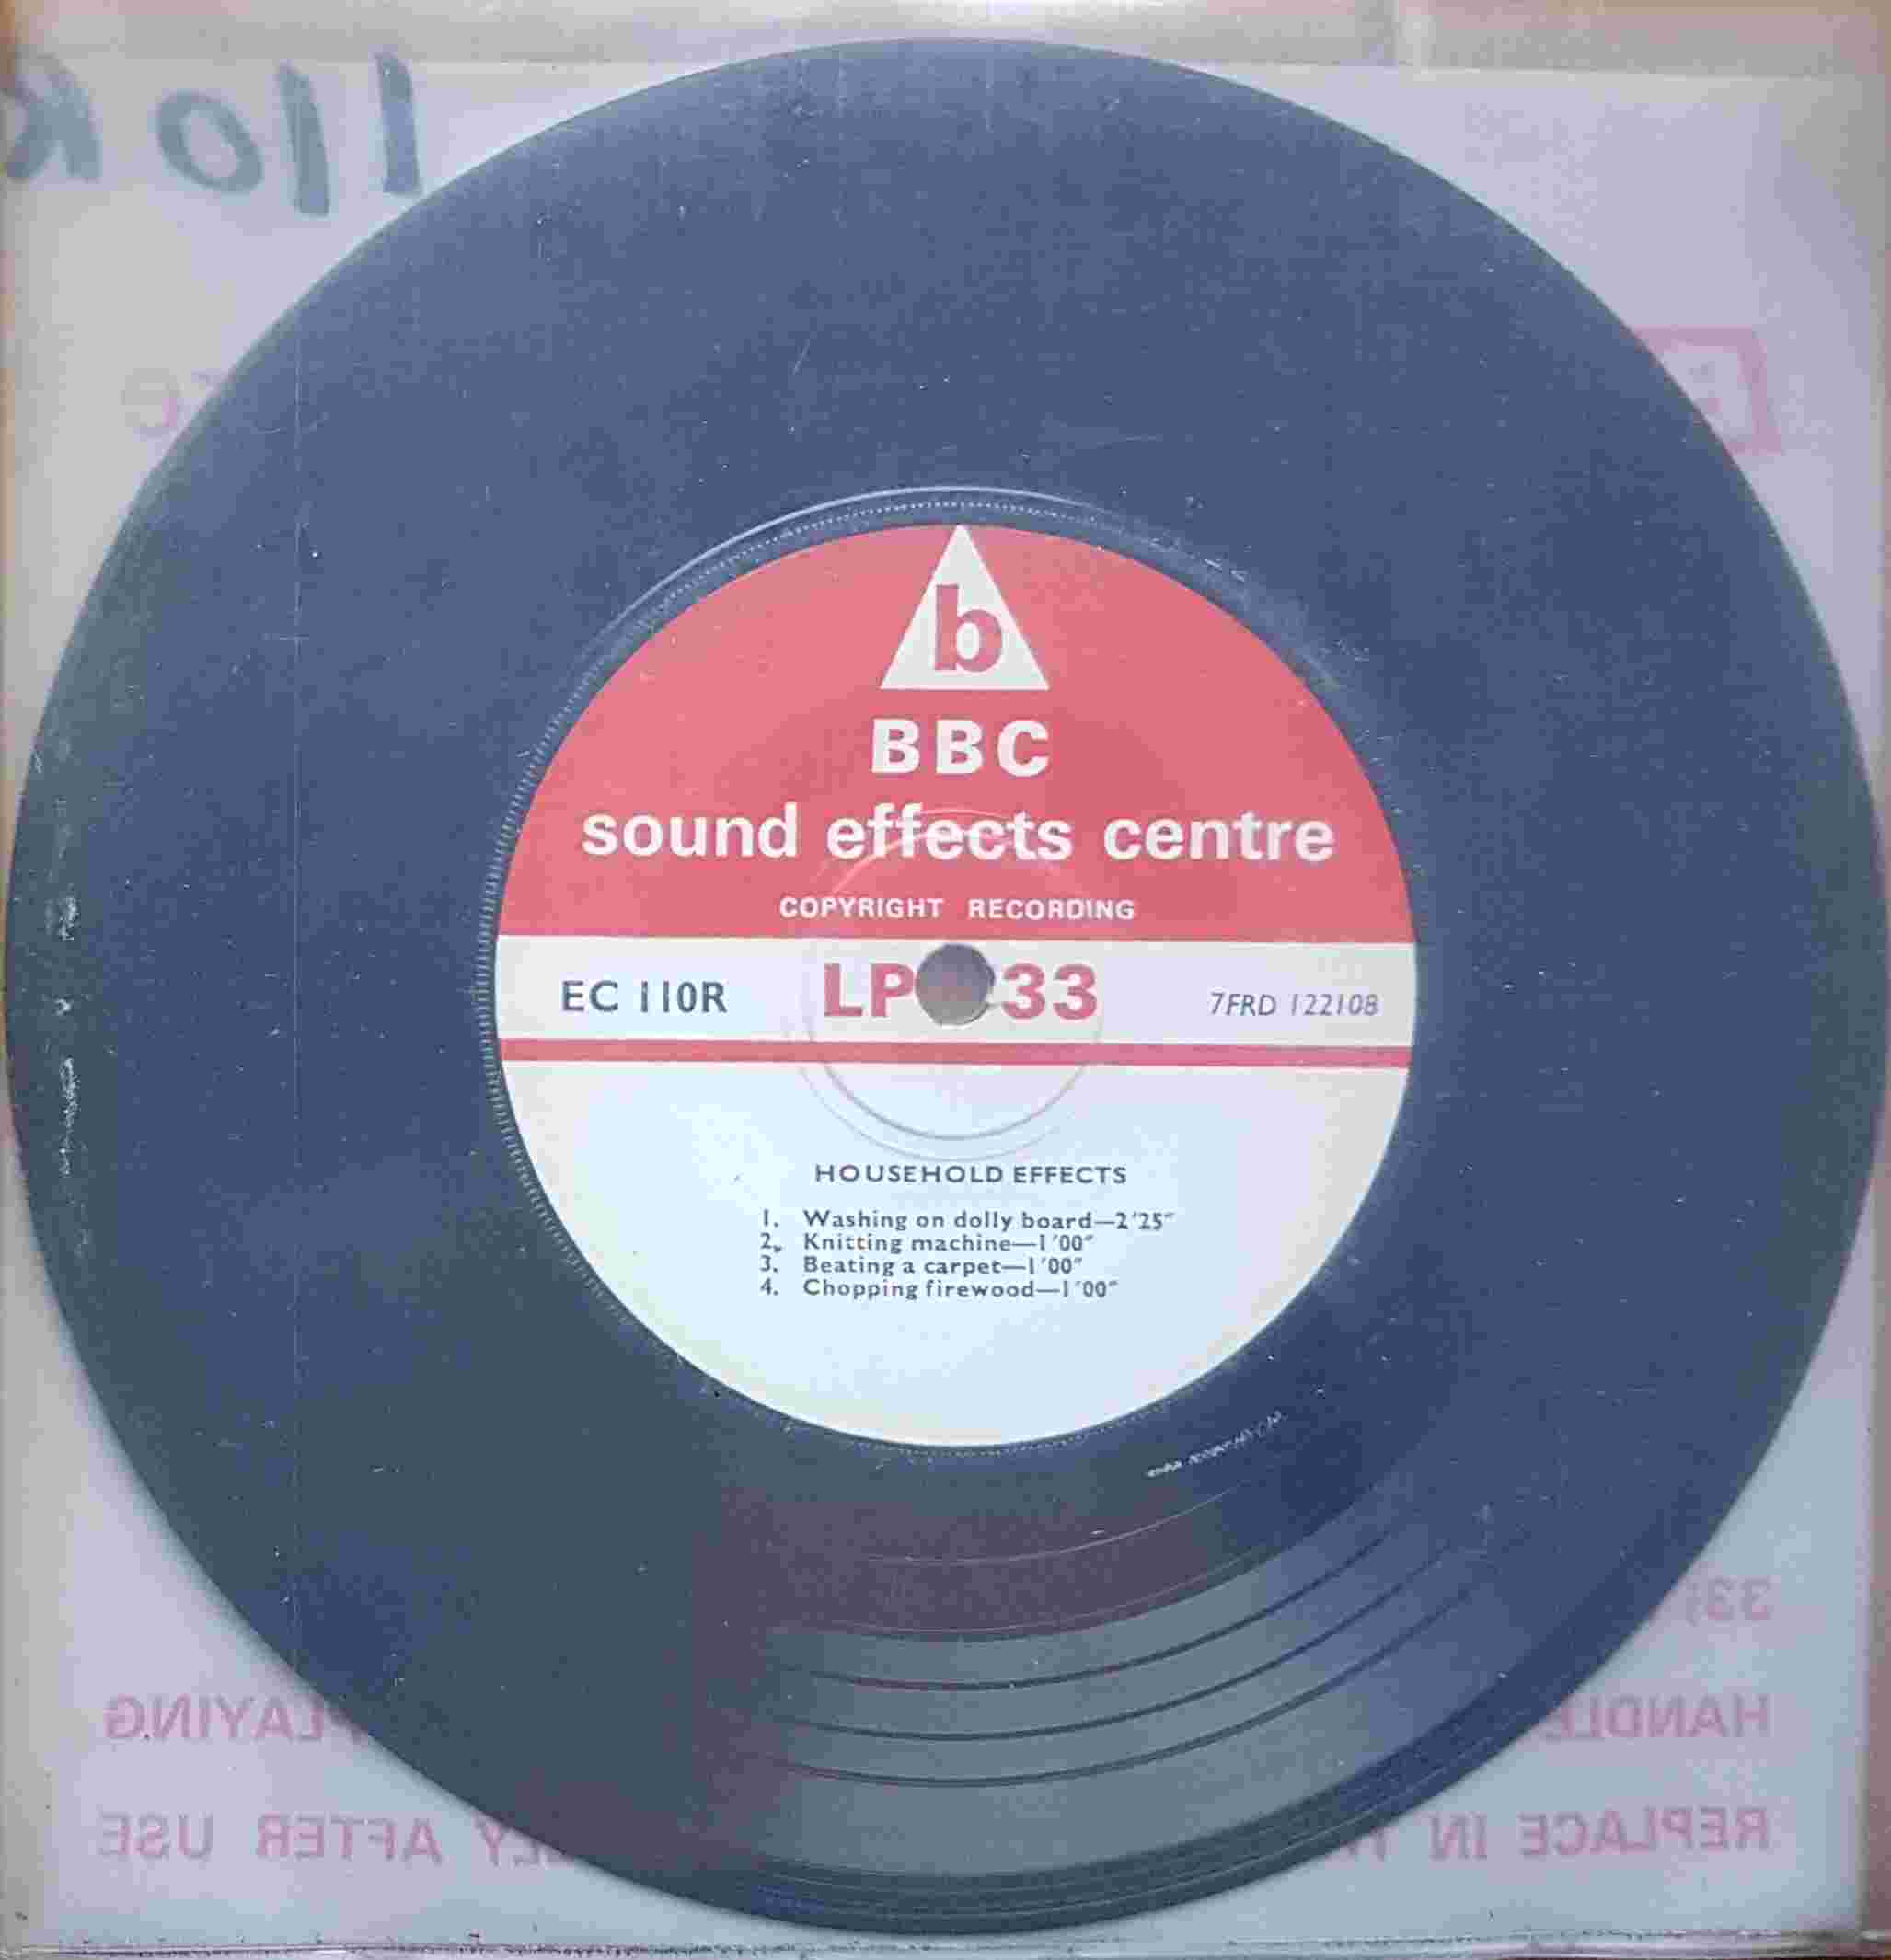 Picture of EC 110R Household effects by artist Not registered from the BBC records and Tapes library